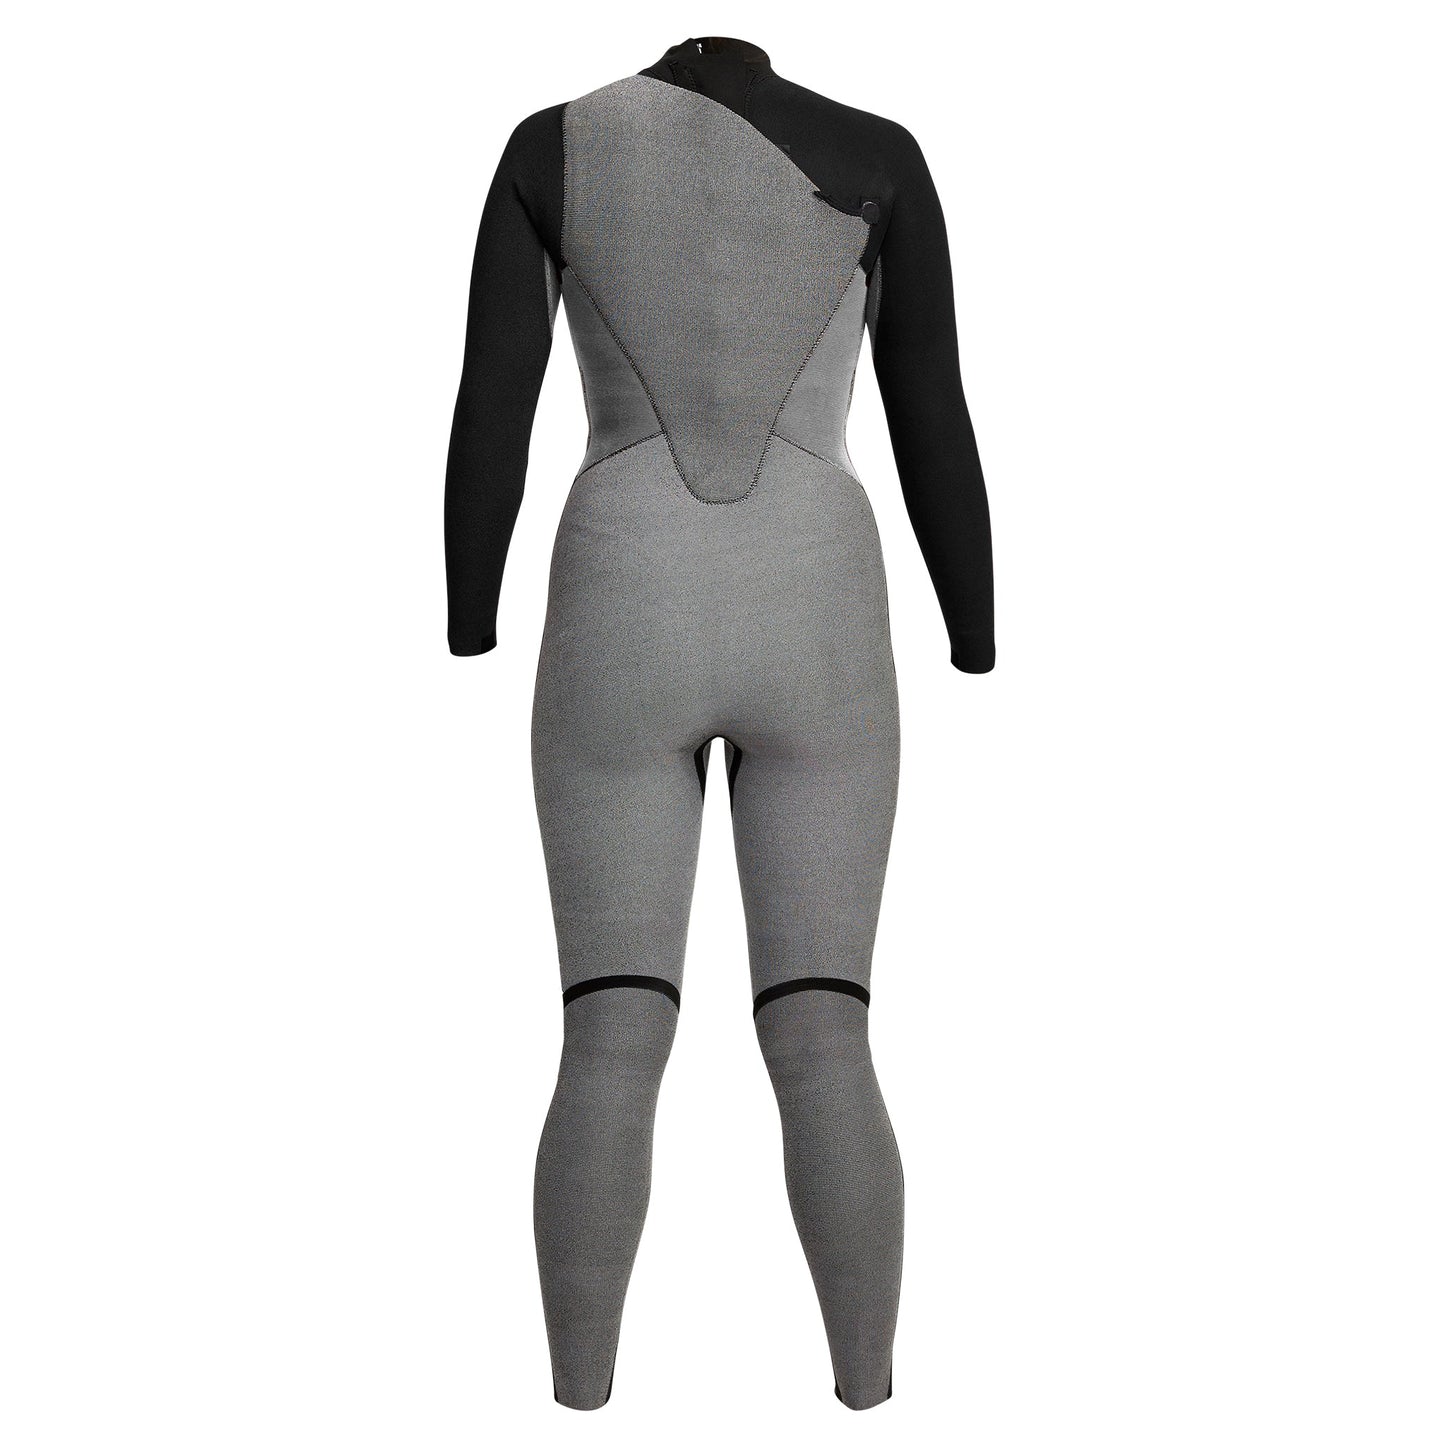 Interior back of the Women's Axis X Back Zip Full Wetsuit 3/2mm